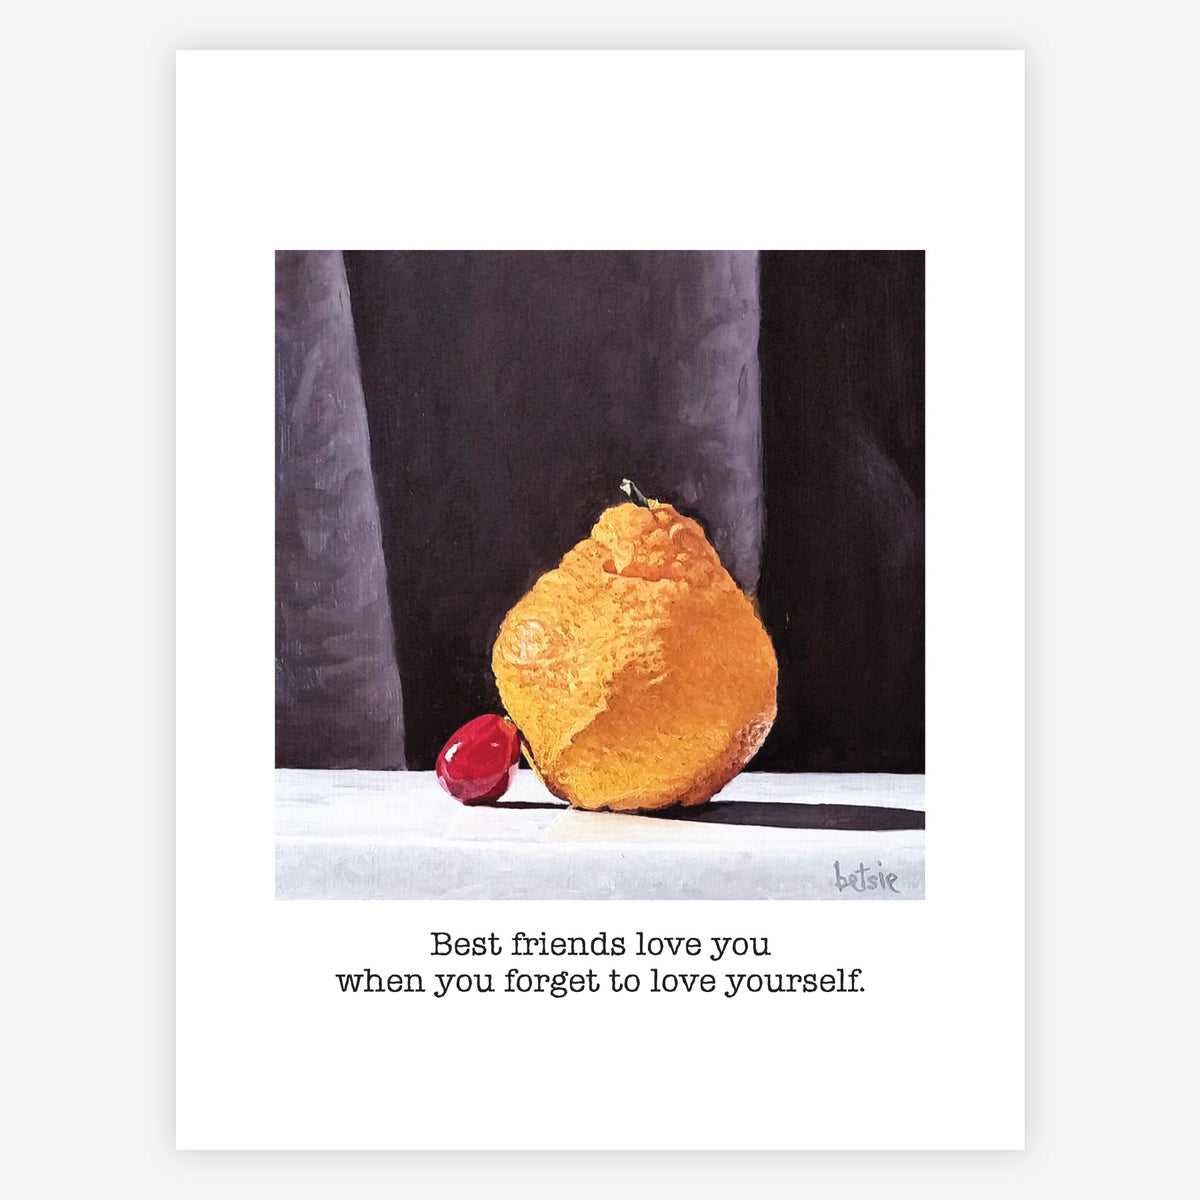 "Best friends love you when you forget" Greeting Card